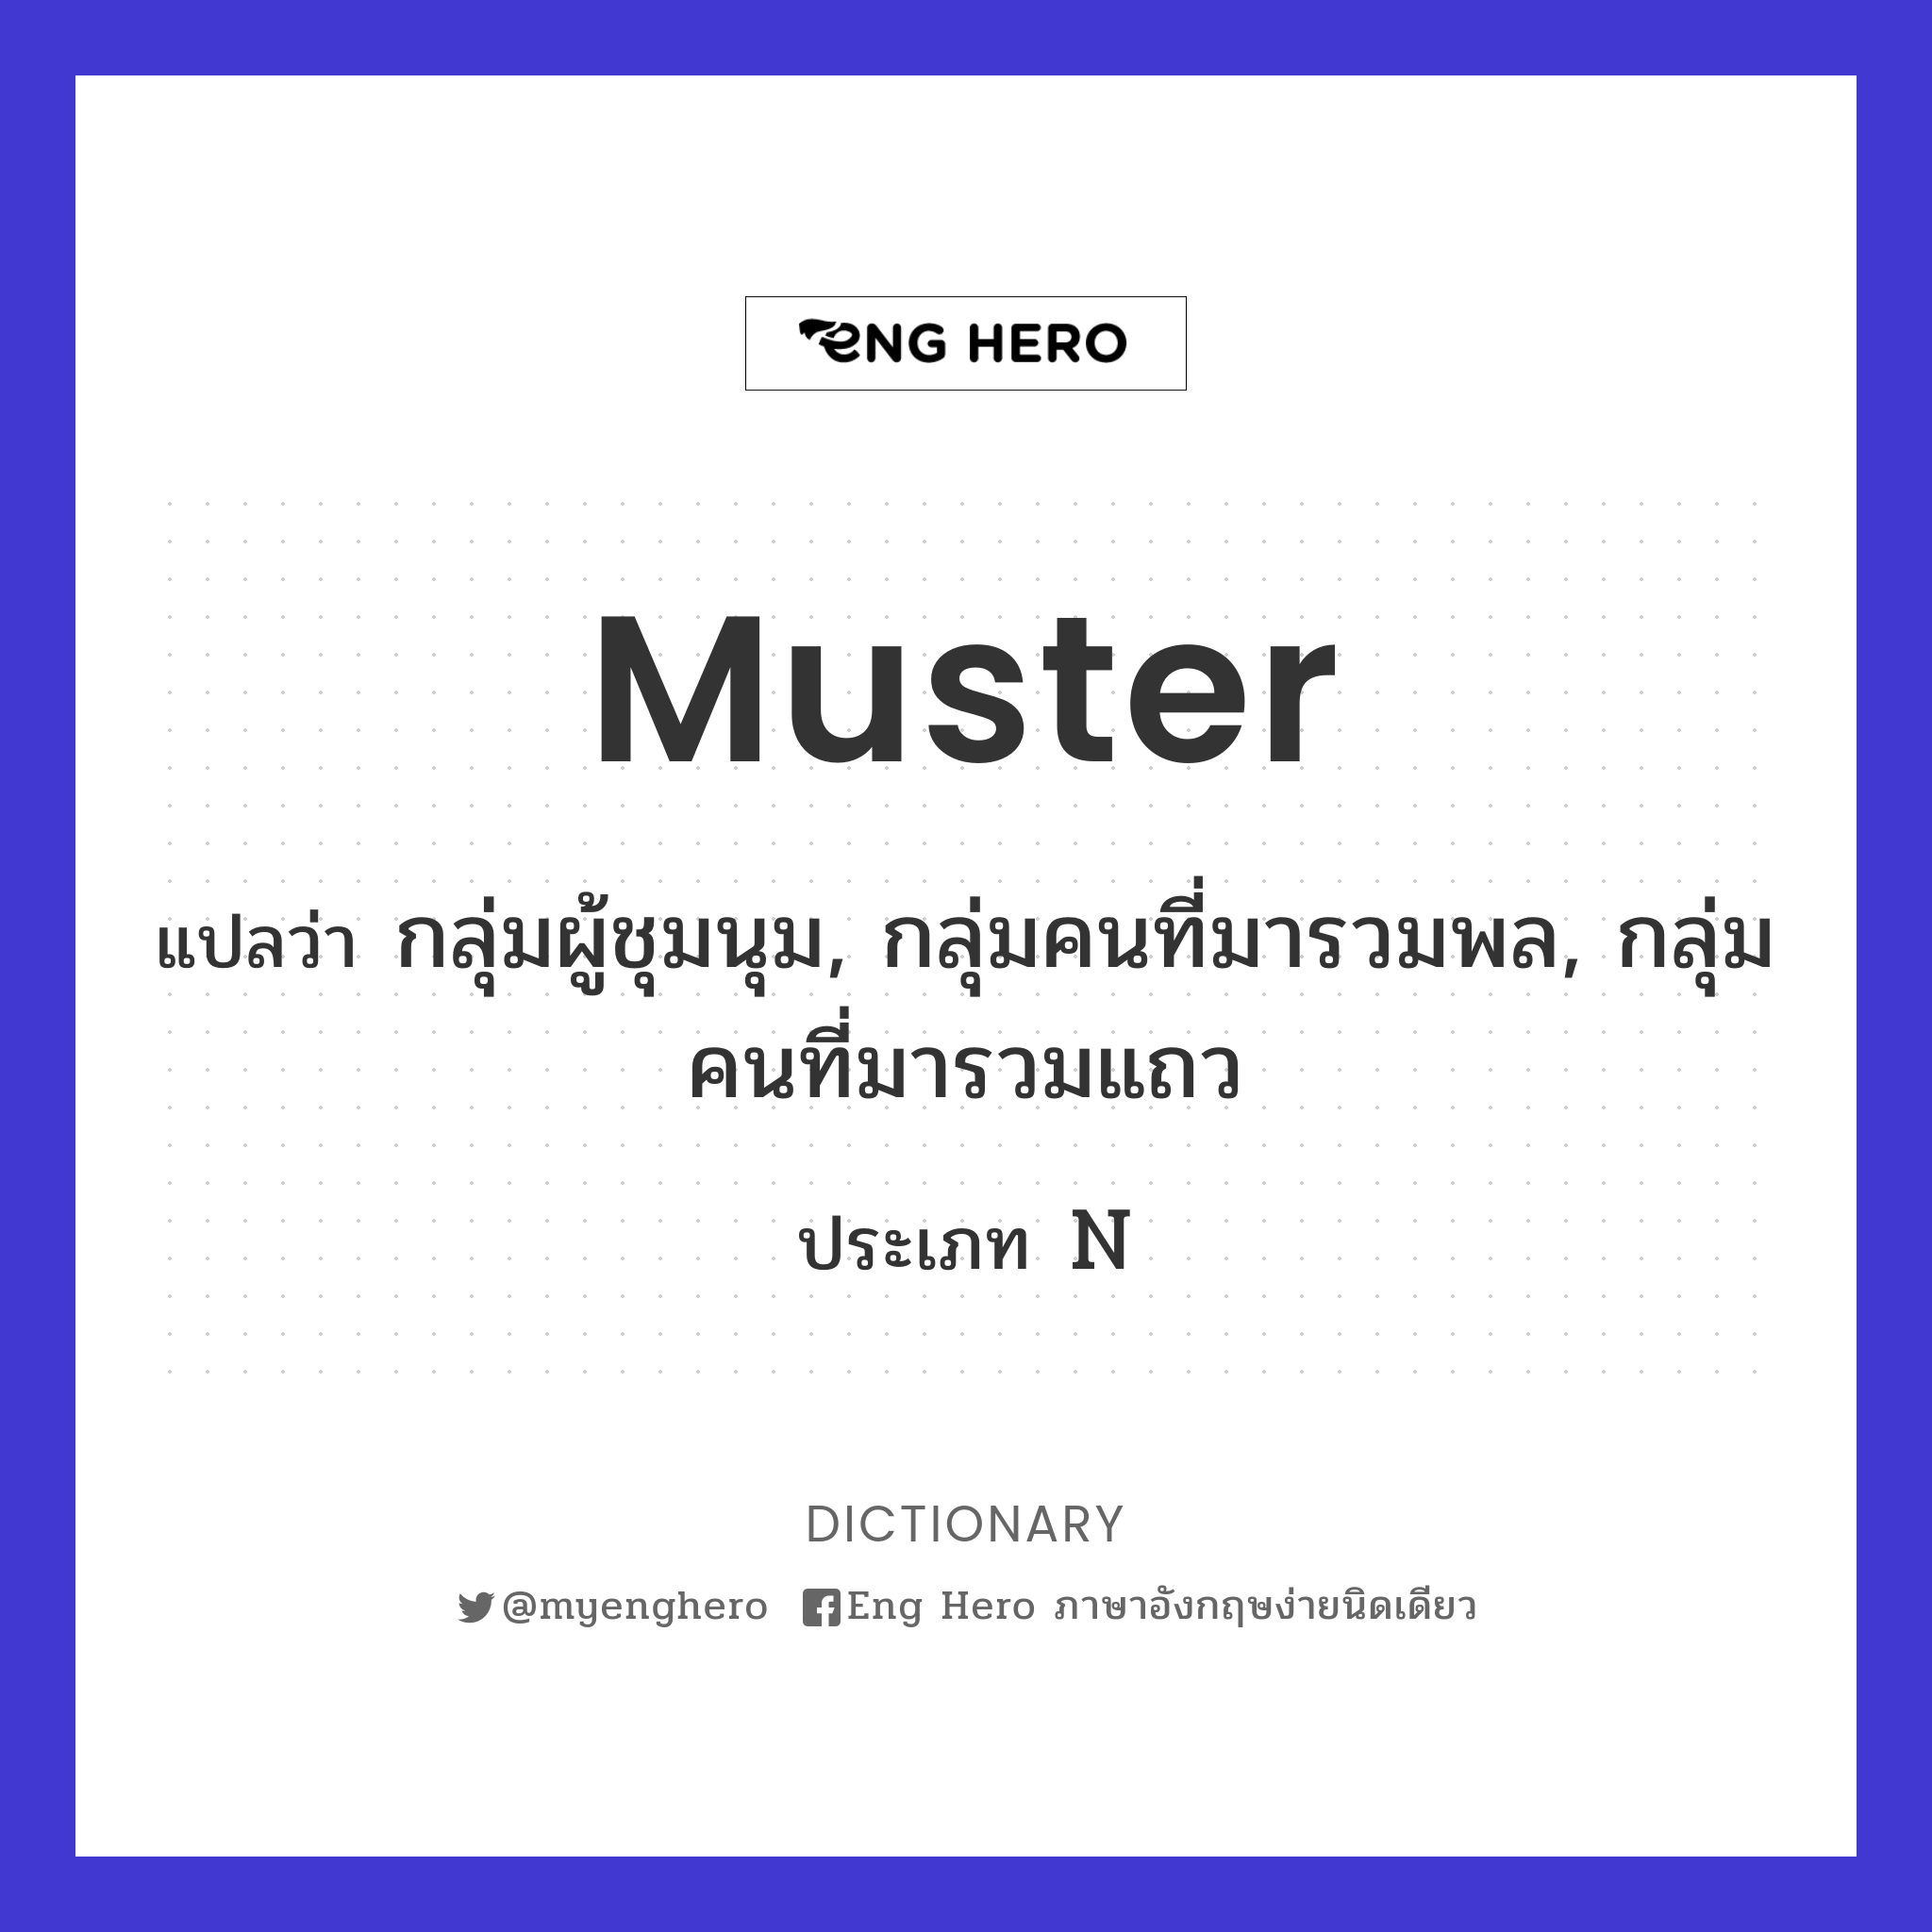 muster